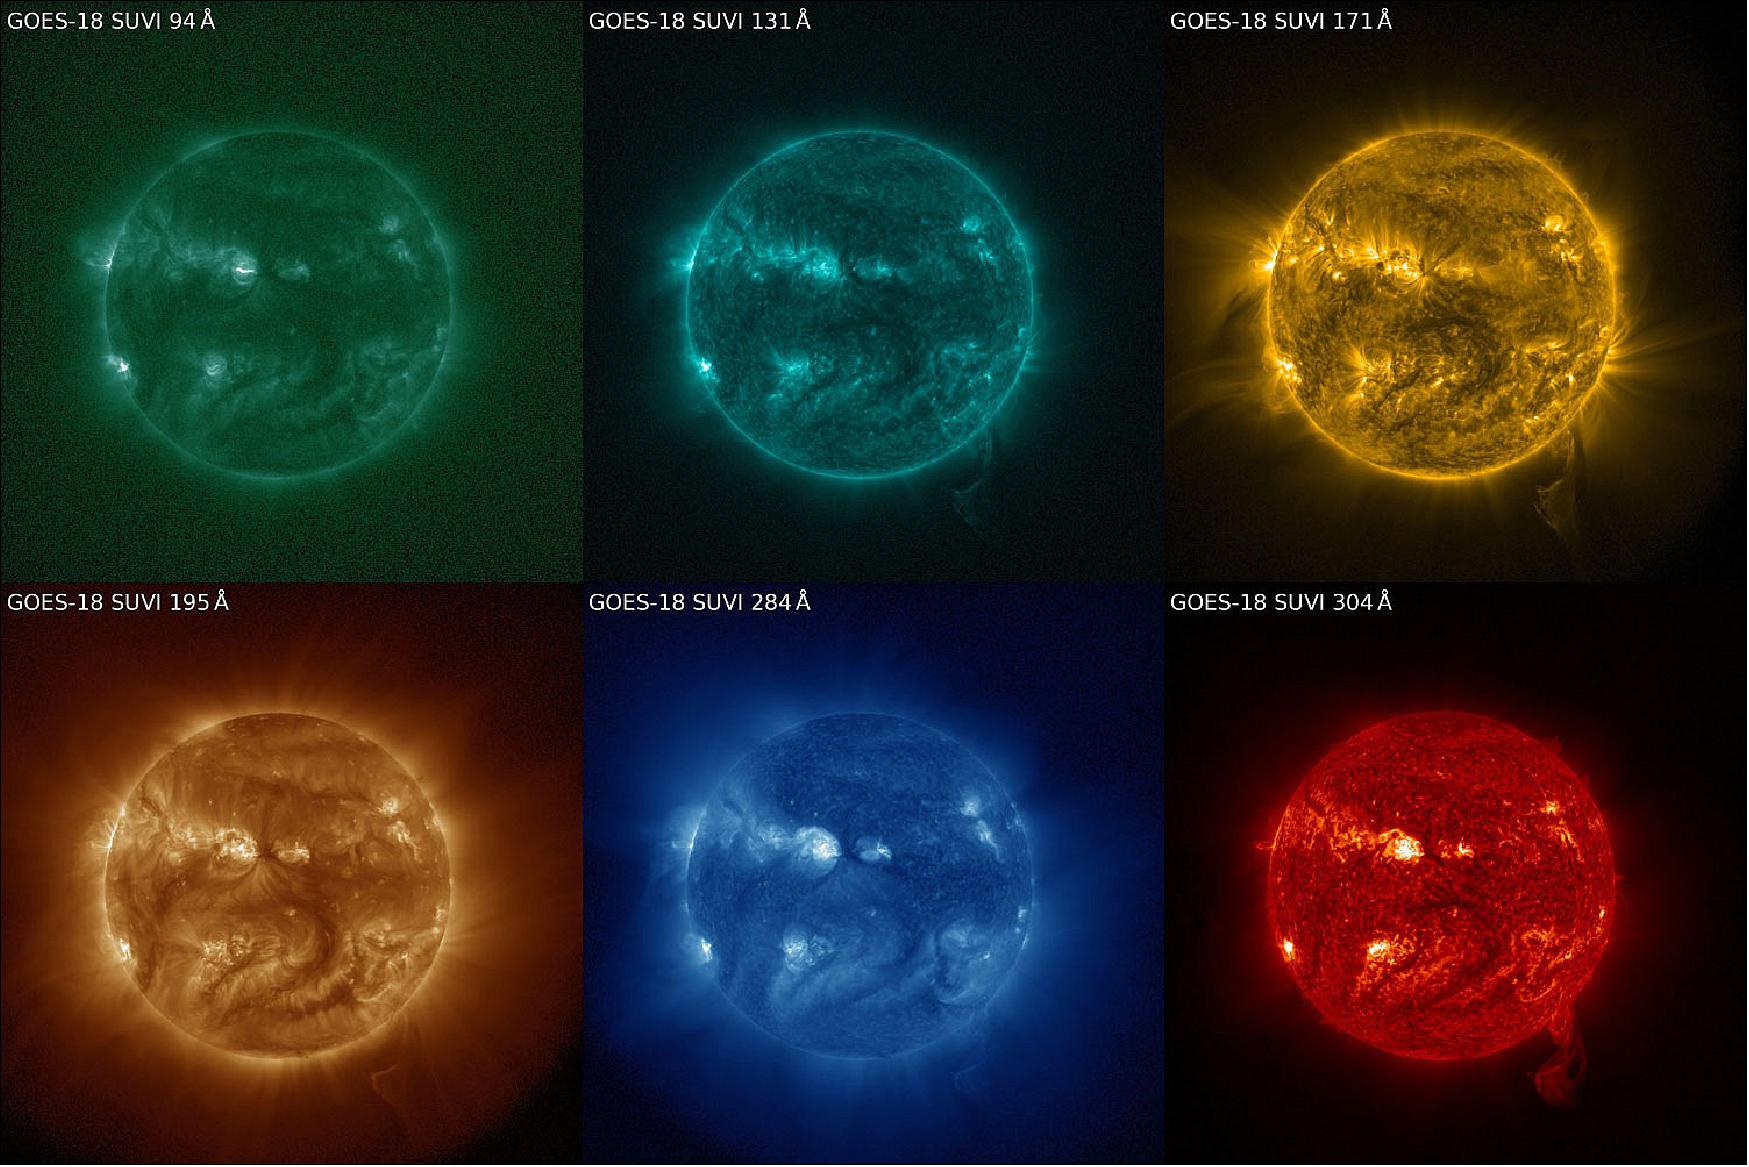 Figure 20: The GOES-18 SUVI captured a coronal mass ejection on July 10, 2022. The sun is seen SUVI's six extreme ultraviolet channels. The clearest depiction of the CME captured on July 10 is in the 304 Å channel (lower right). SUVI also has a large field of view, which allows scientists to observe distinctive features of the corona (image credit: NOAA/NESDIS)